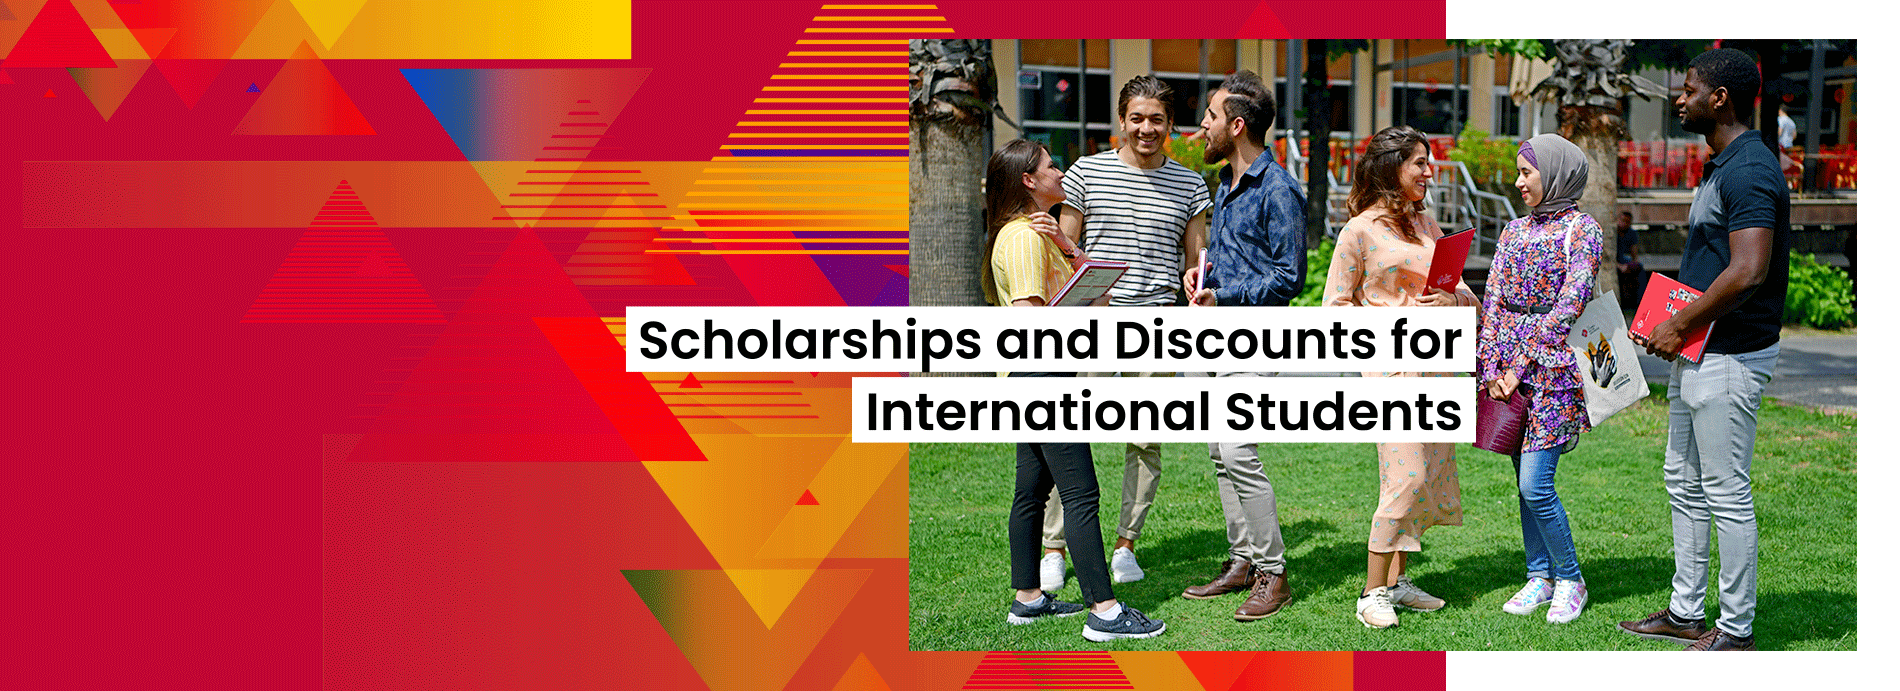 Scholarships and Discounts